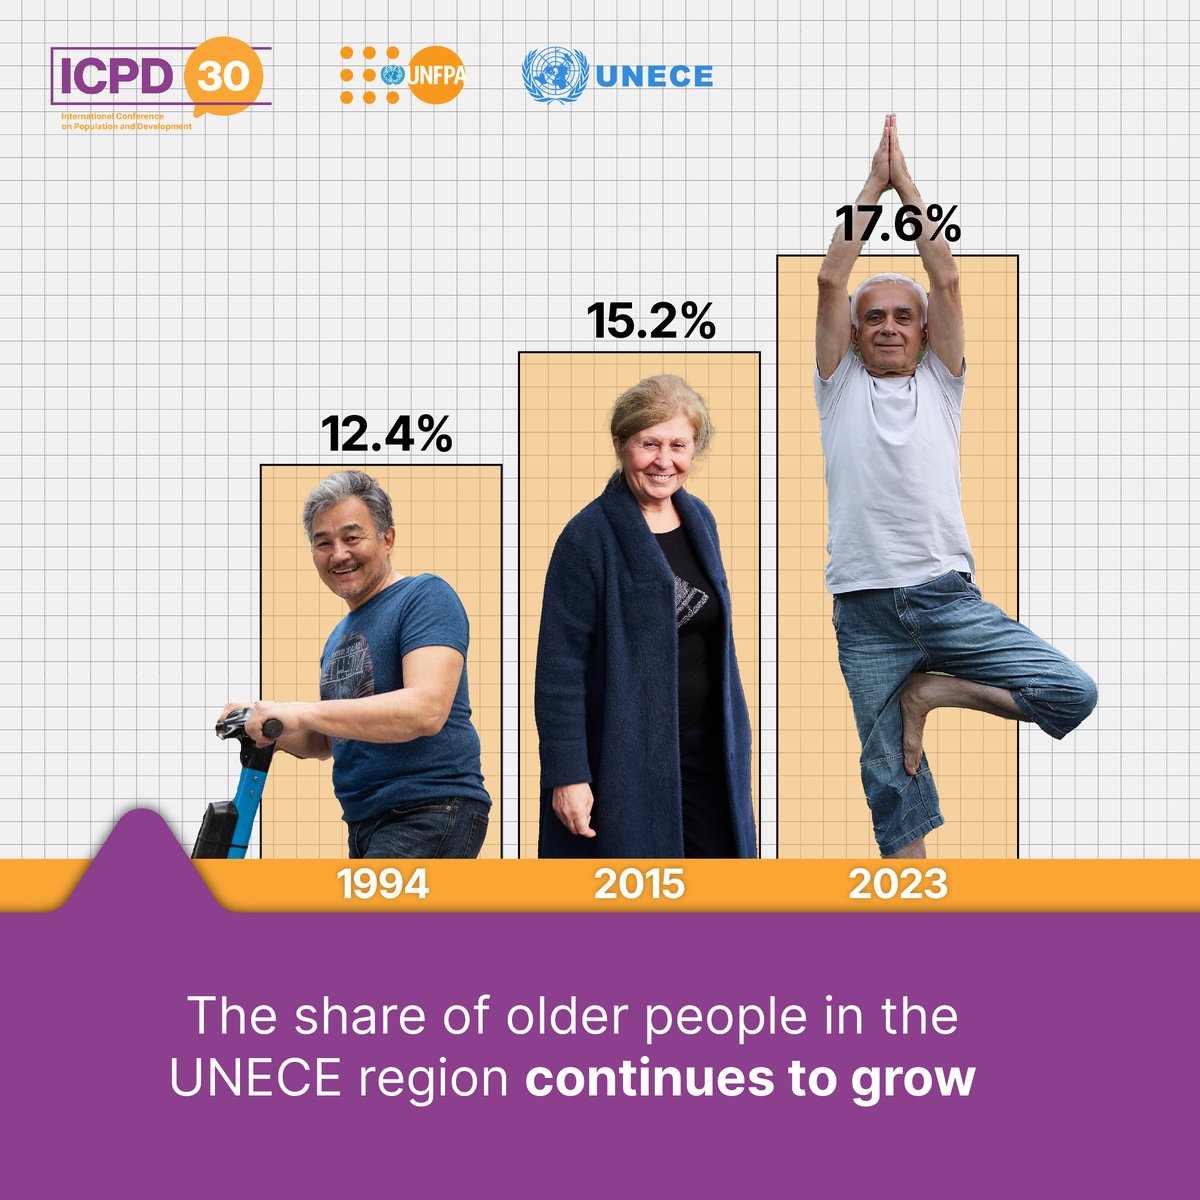 On #LabourDay, let's renew commitment to freedom from #discrimination for workers of all ages❗️ In #Europe & N.#America, 1 in 4 people will be 65 years old or above by 2050. Whole of society efforts are needed to combat #ageism for thriving economies & inclusive societies #CPD57